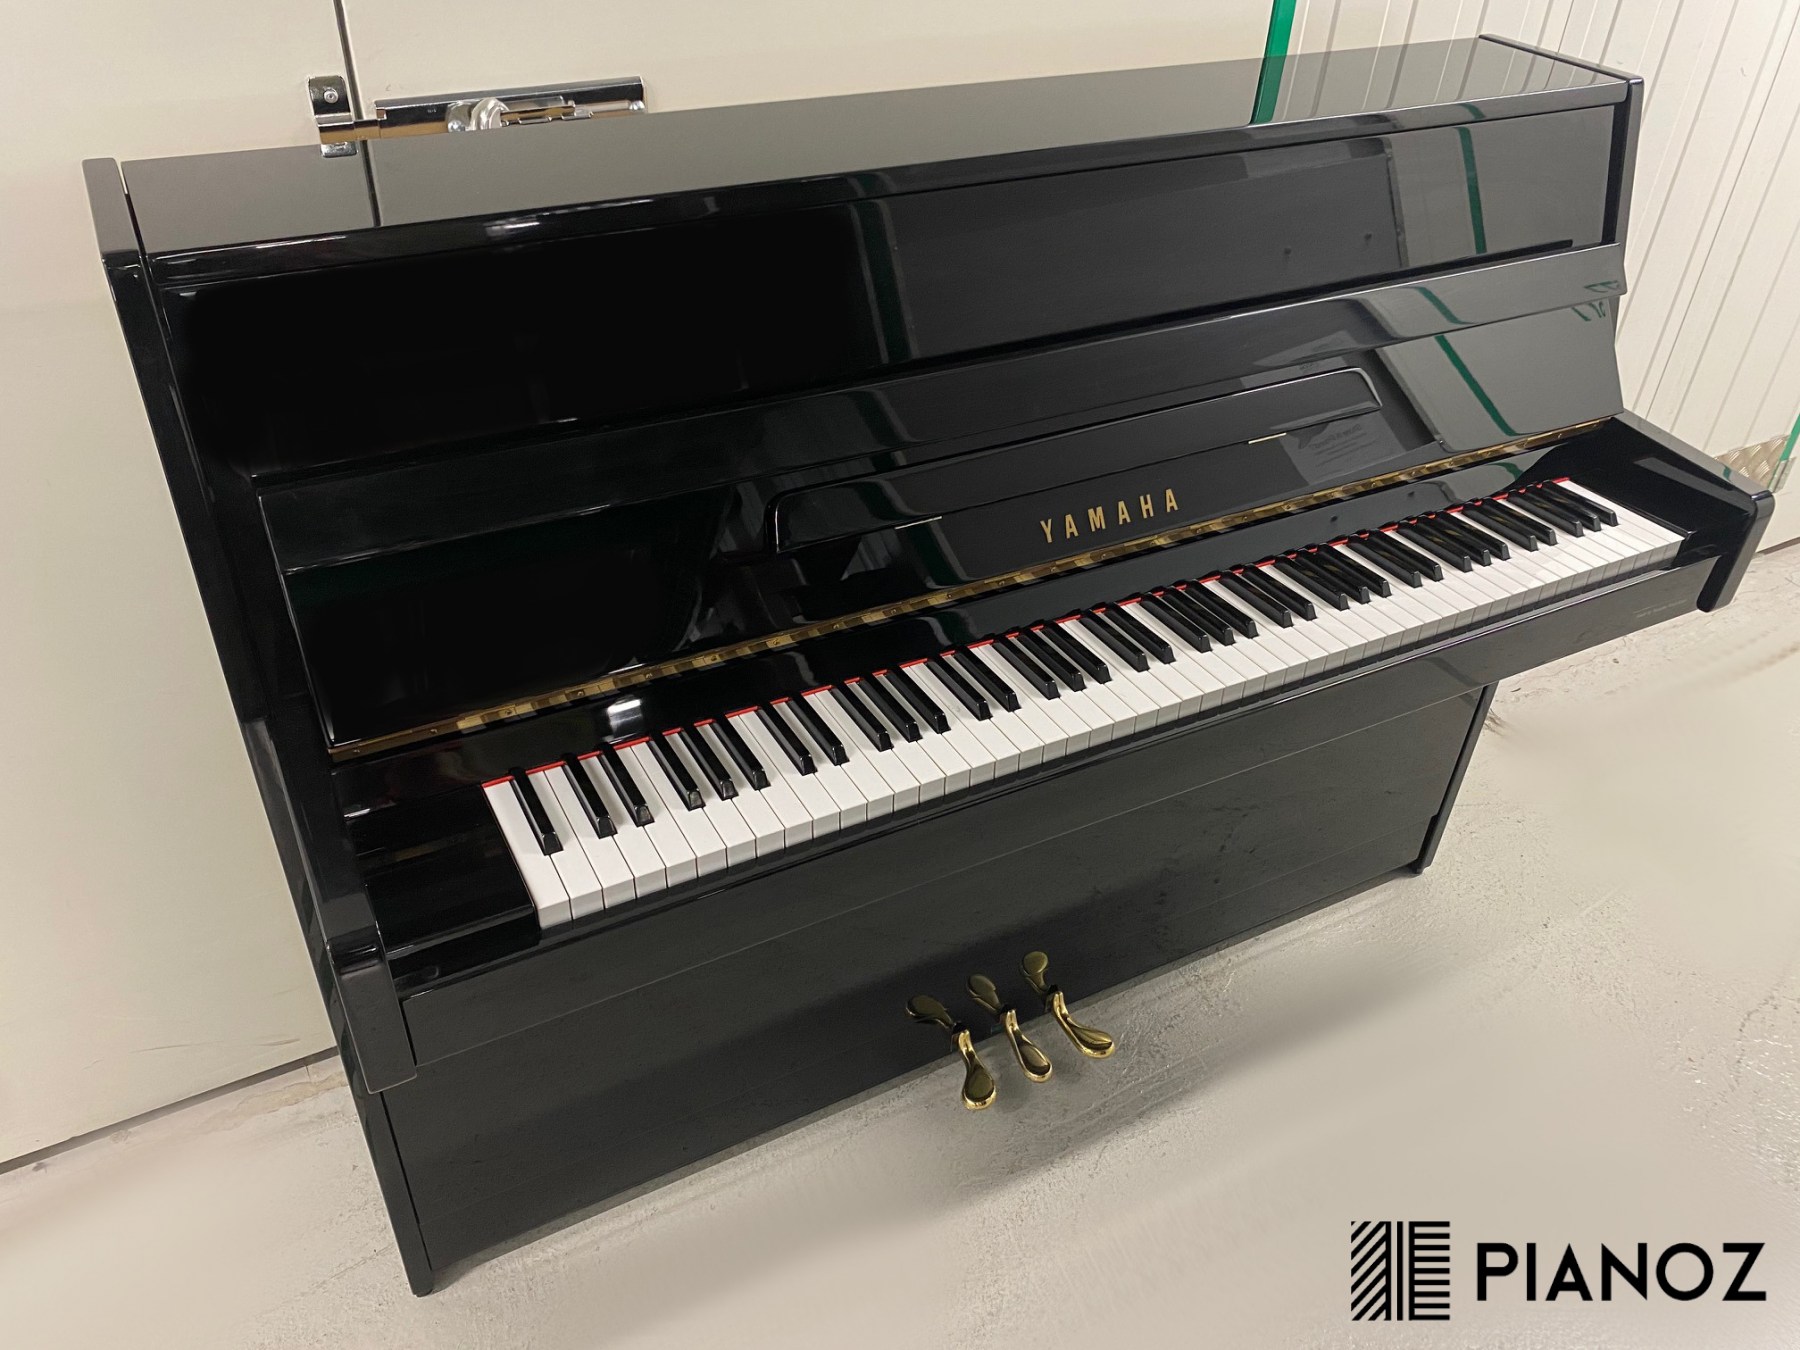 Yamaha C110 Black Upright Piano piano for sale in UK